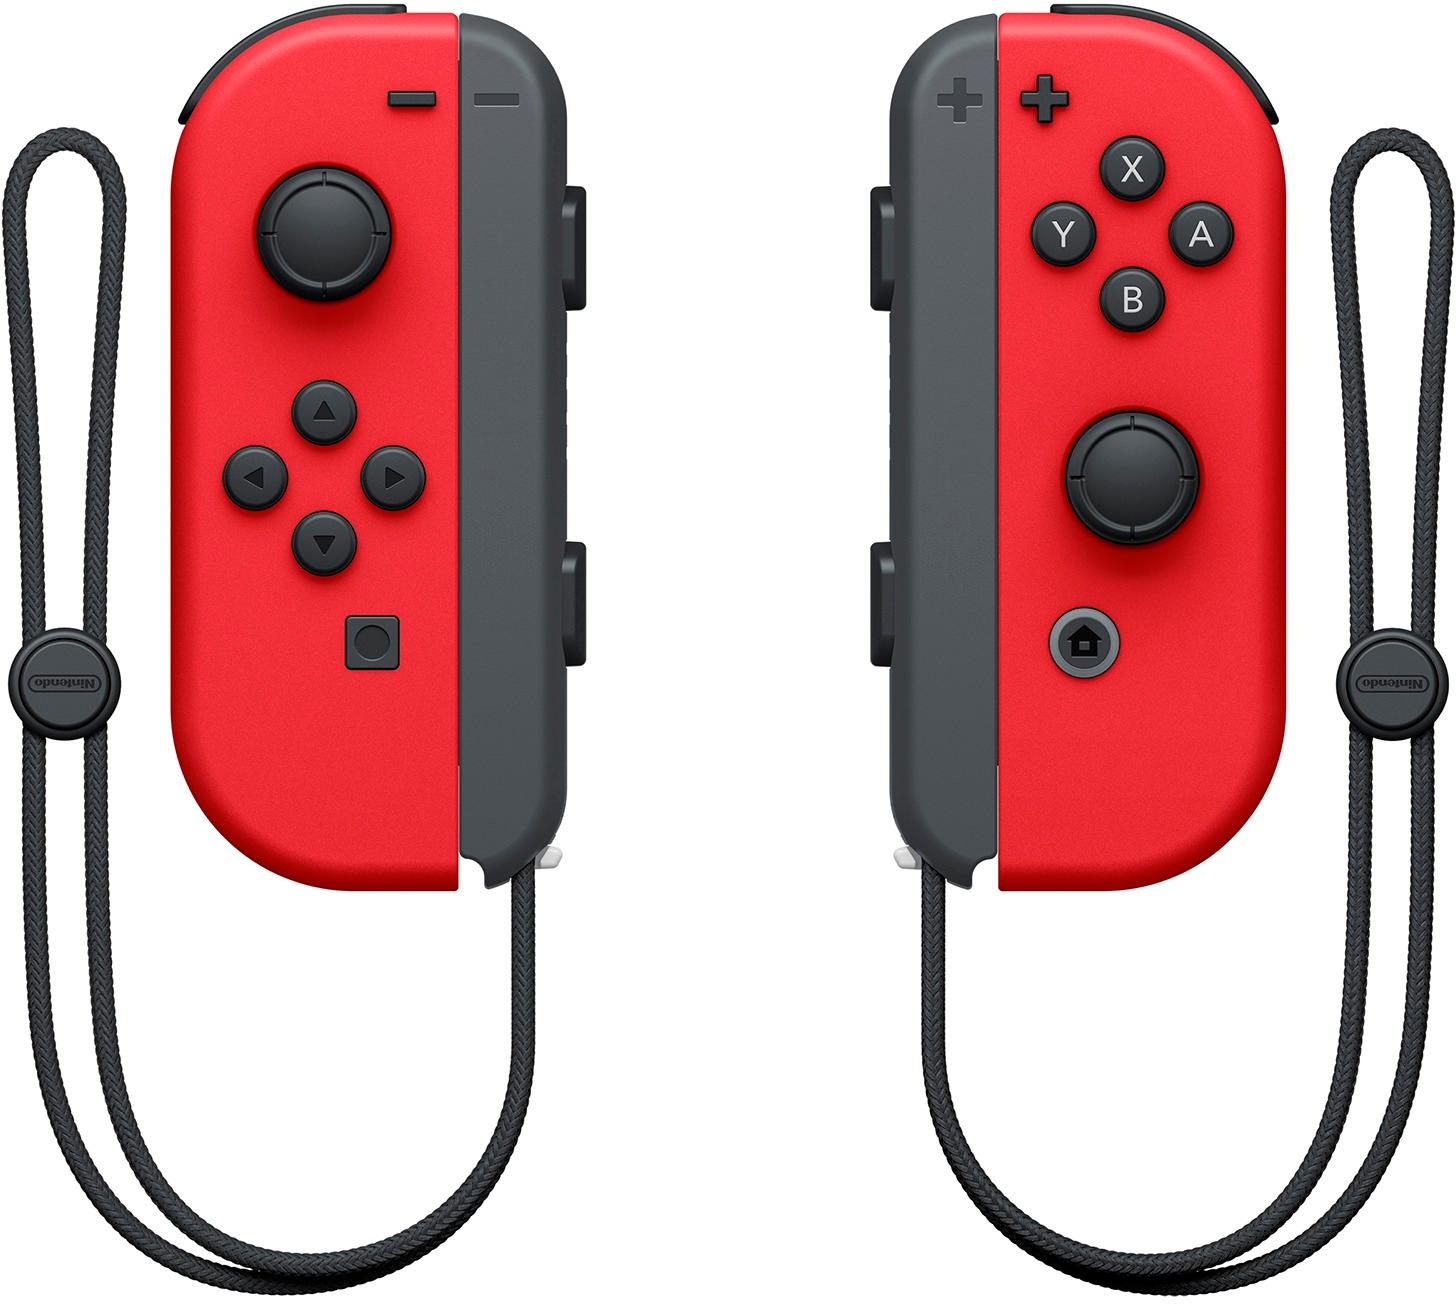 Nintendo Switch 3 items Bundle:Nintendo Switch 32GB Console Neon Red and  Blue Joy-con,64GB Micro SD Memory Card and Super Mario Odyssey Game Disc 